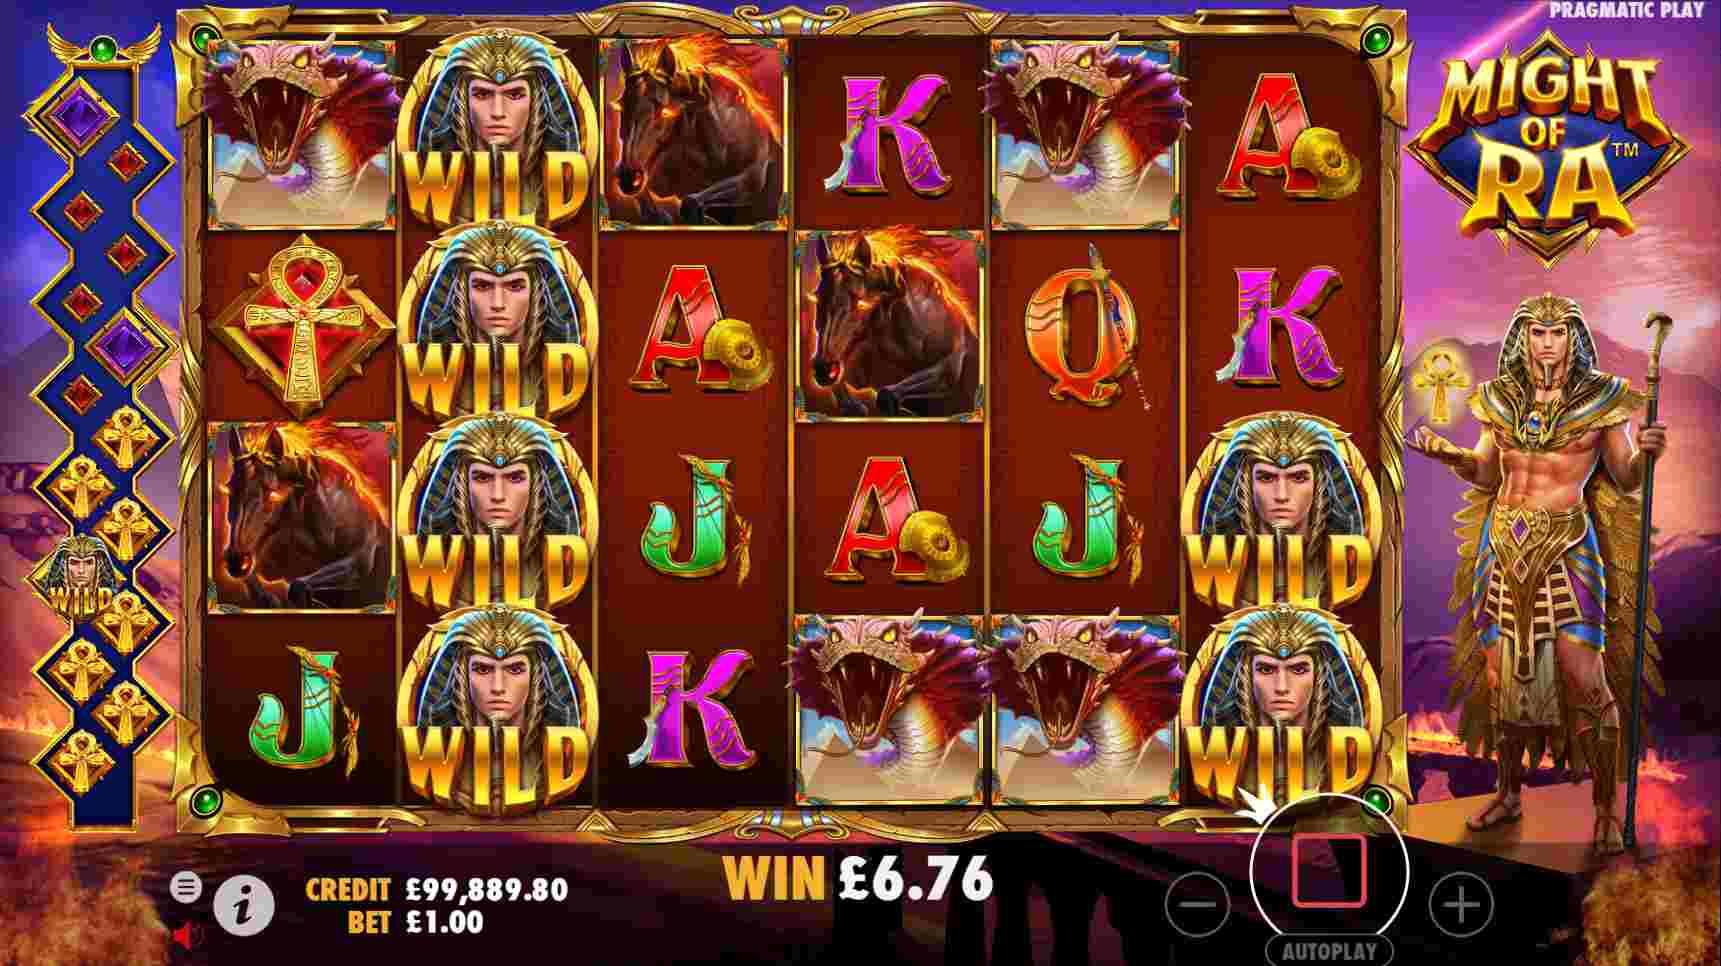 Might of Ra Free Spins